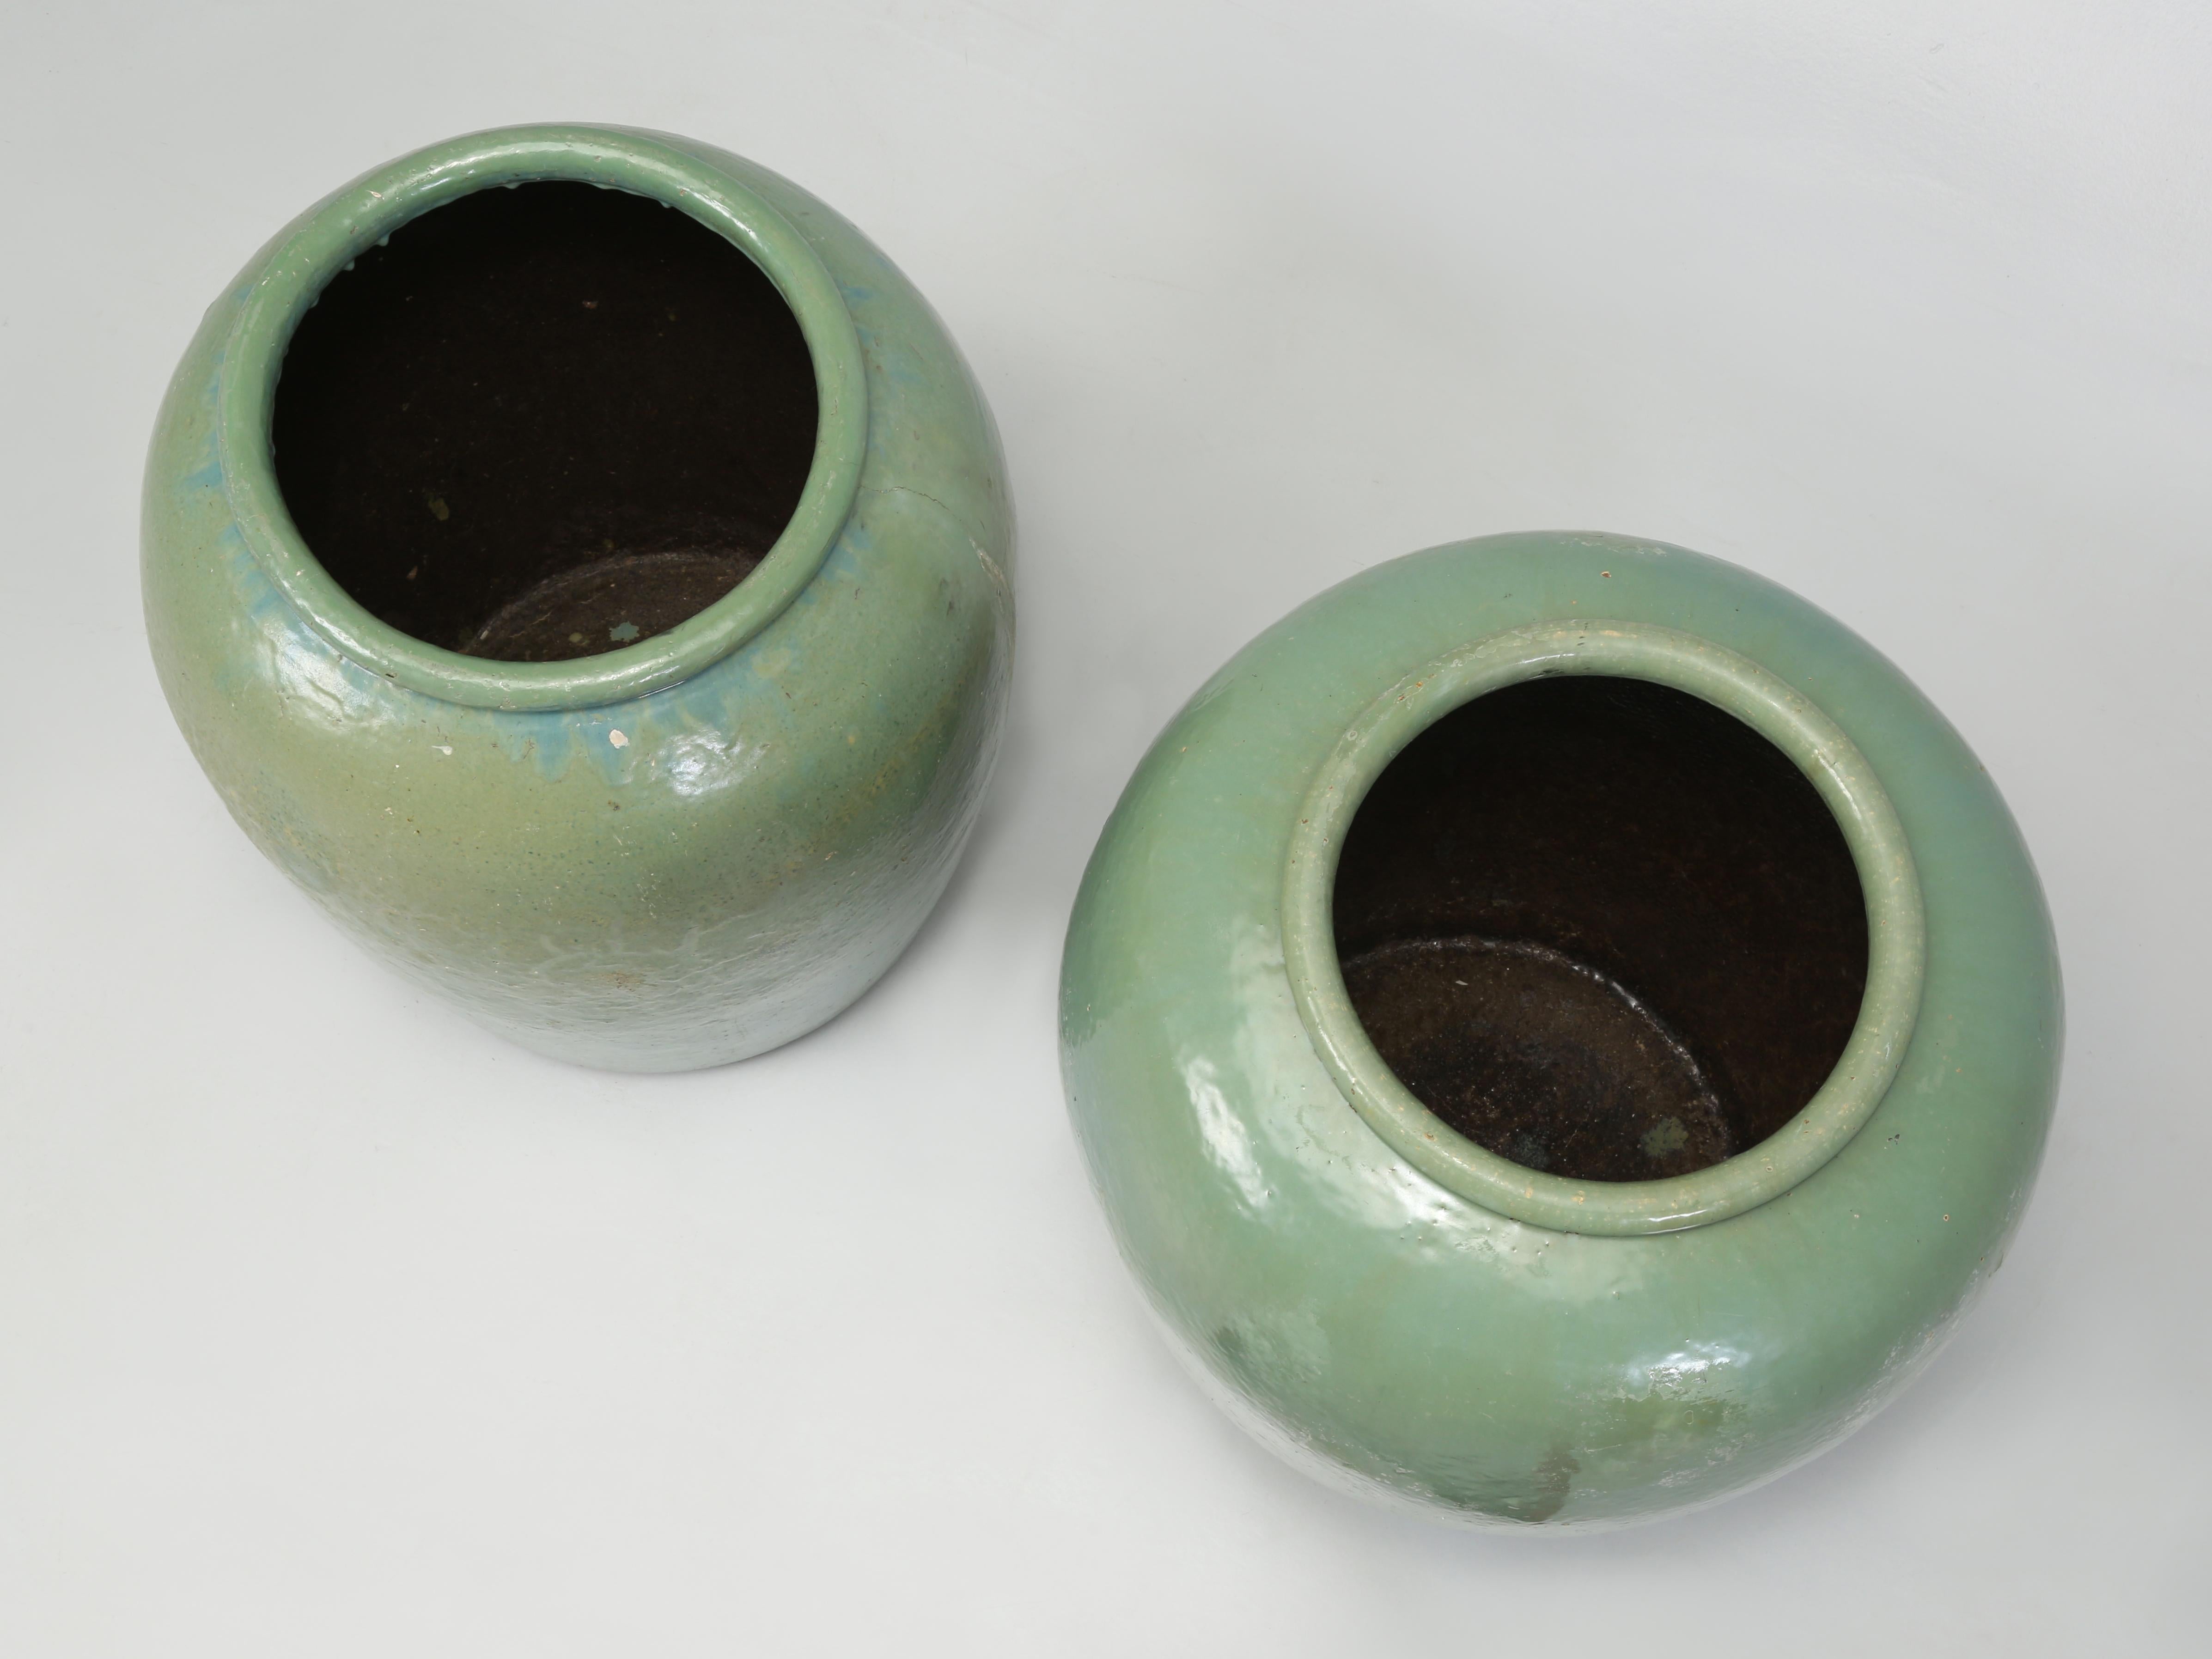 Late 20th Century Glazed Green Vintage Garden Planters Imported from Ireland We'd call a Near Pair